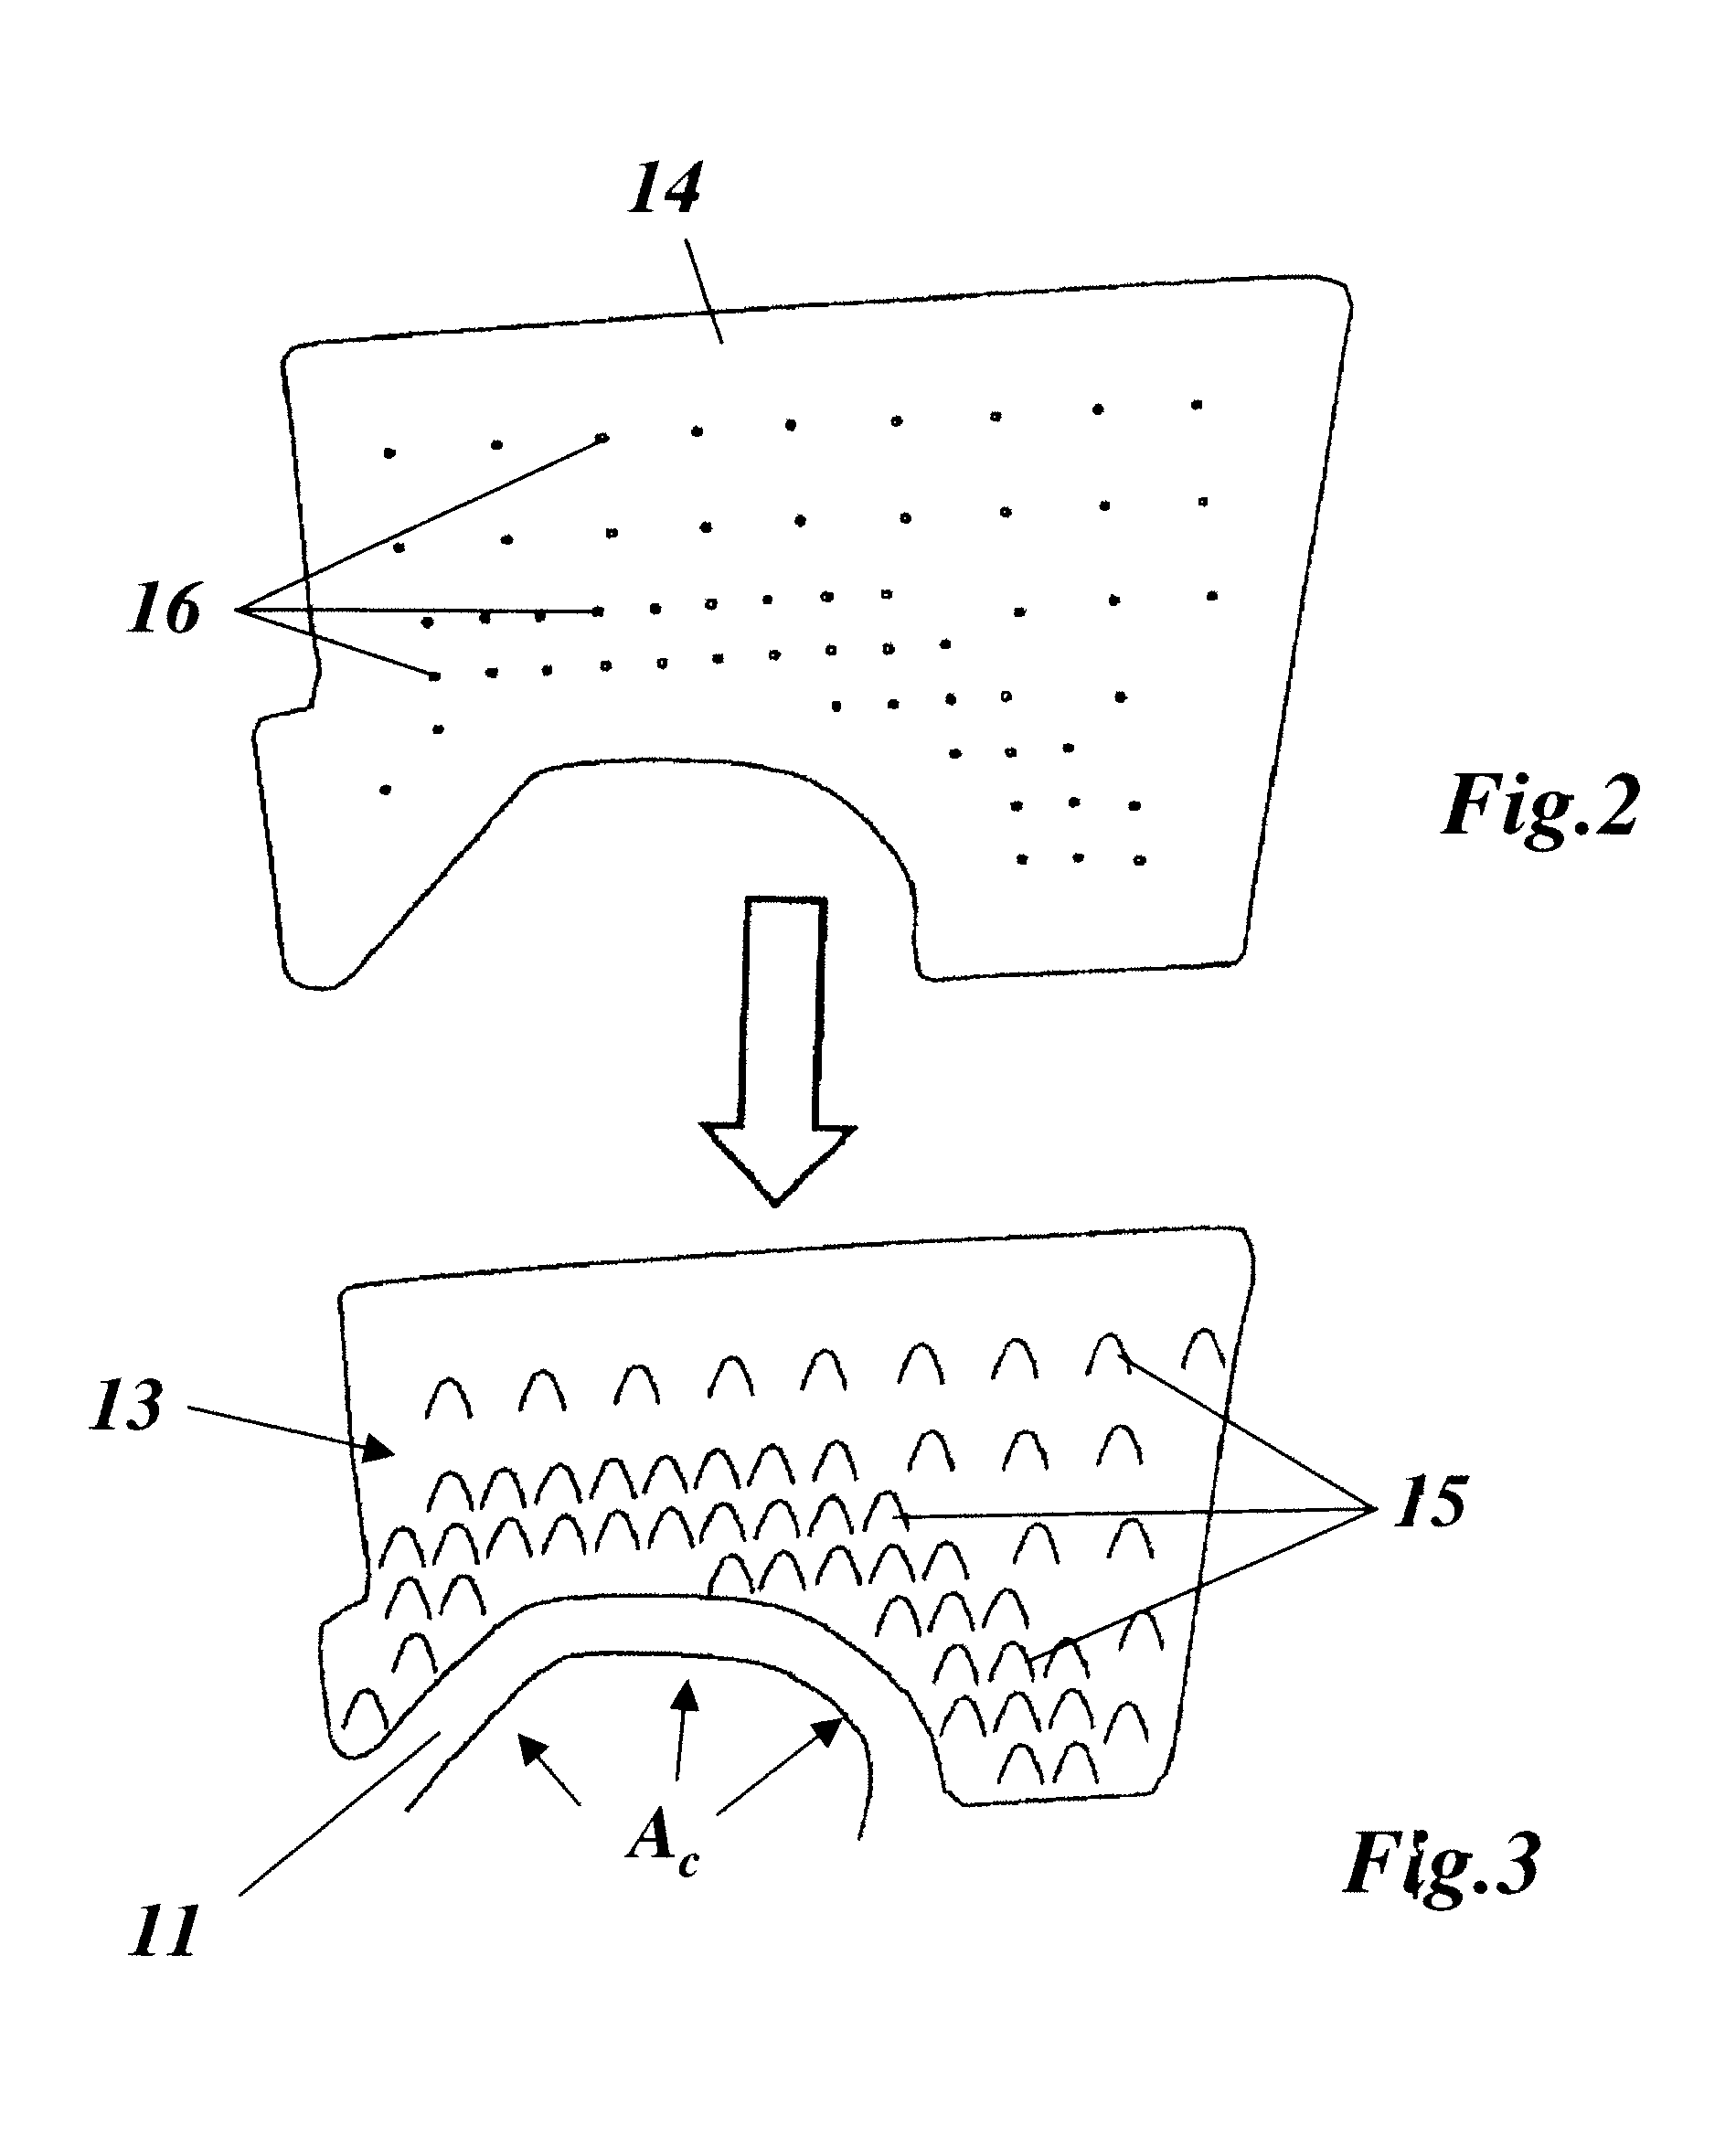 Cooled constructional element for a gas turbine